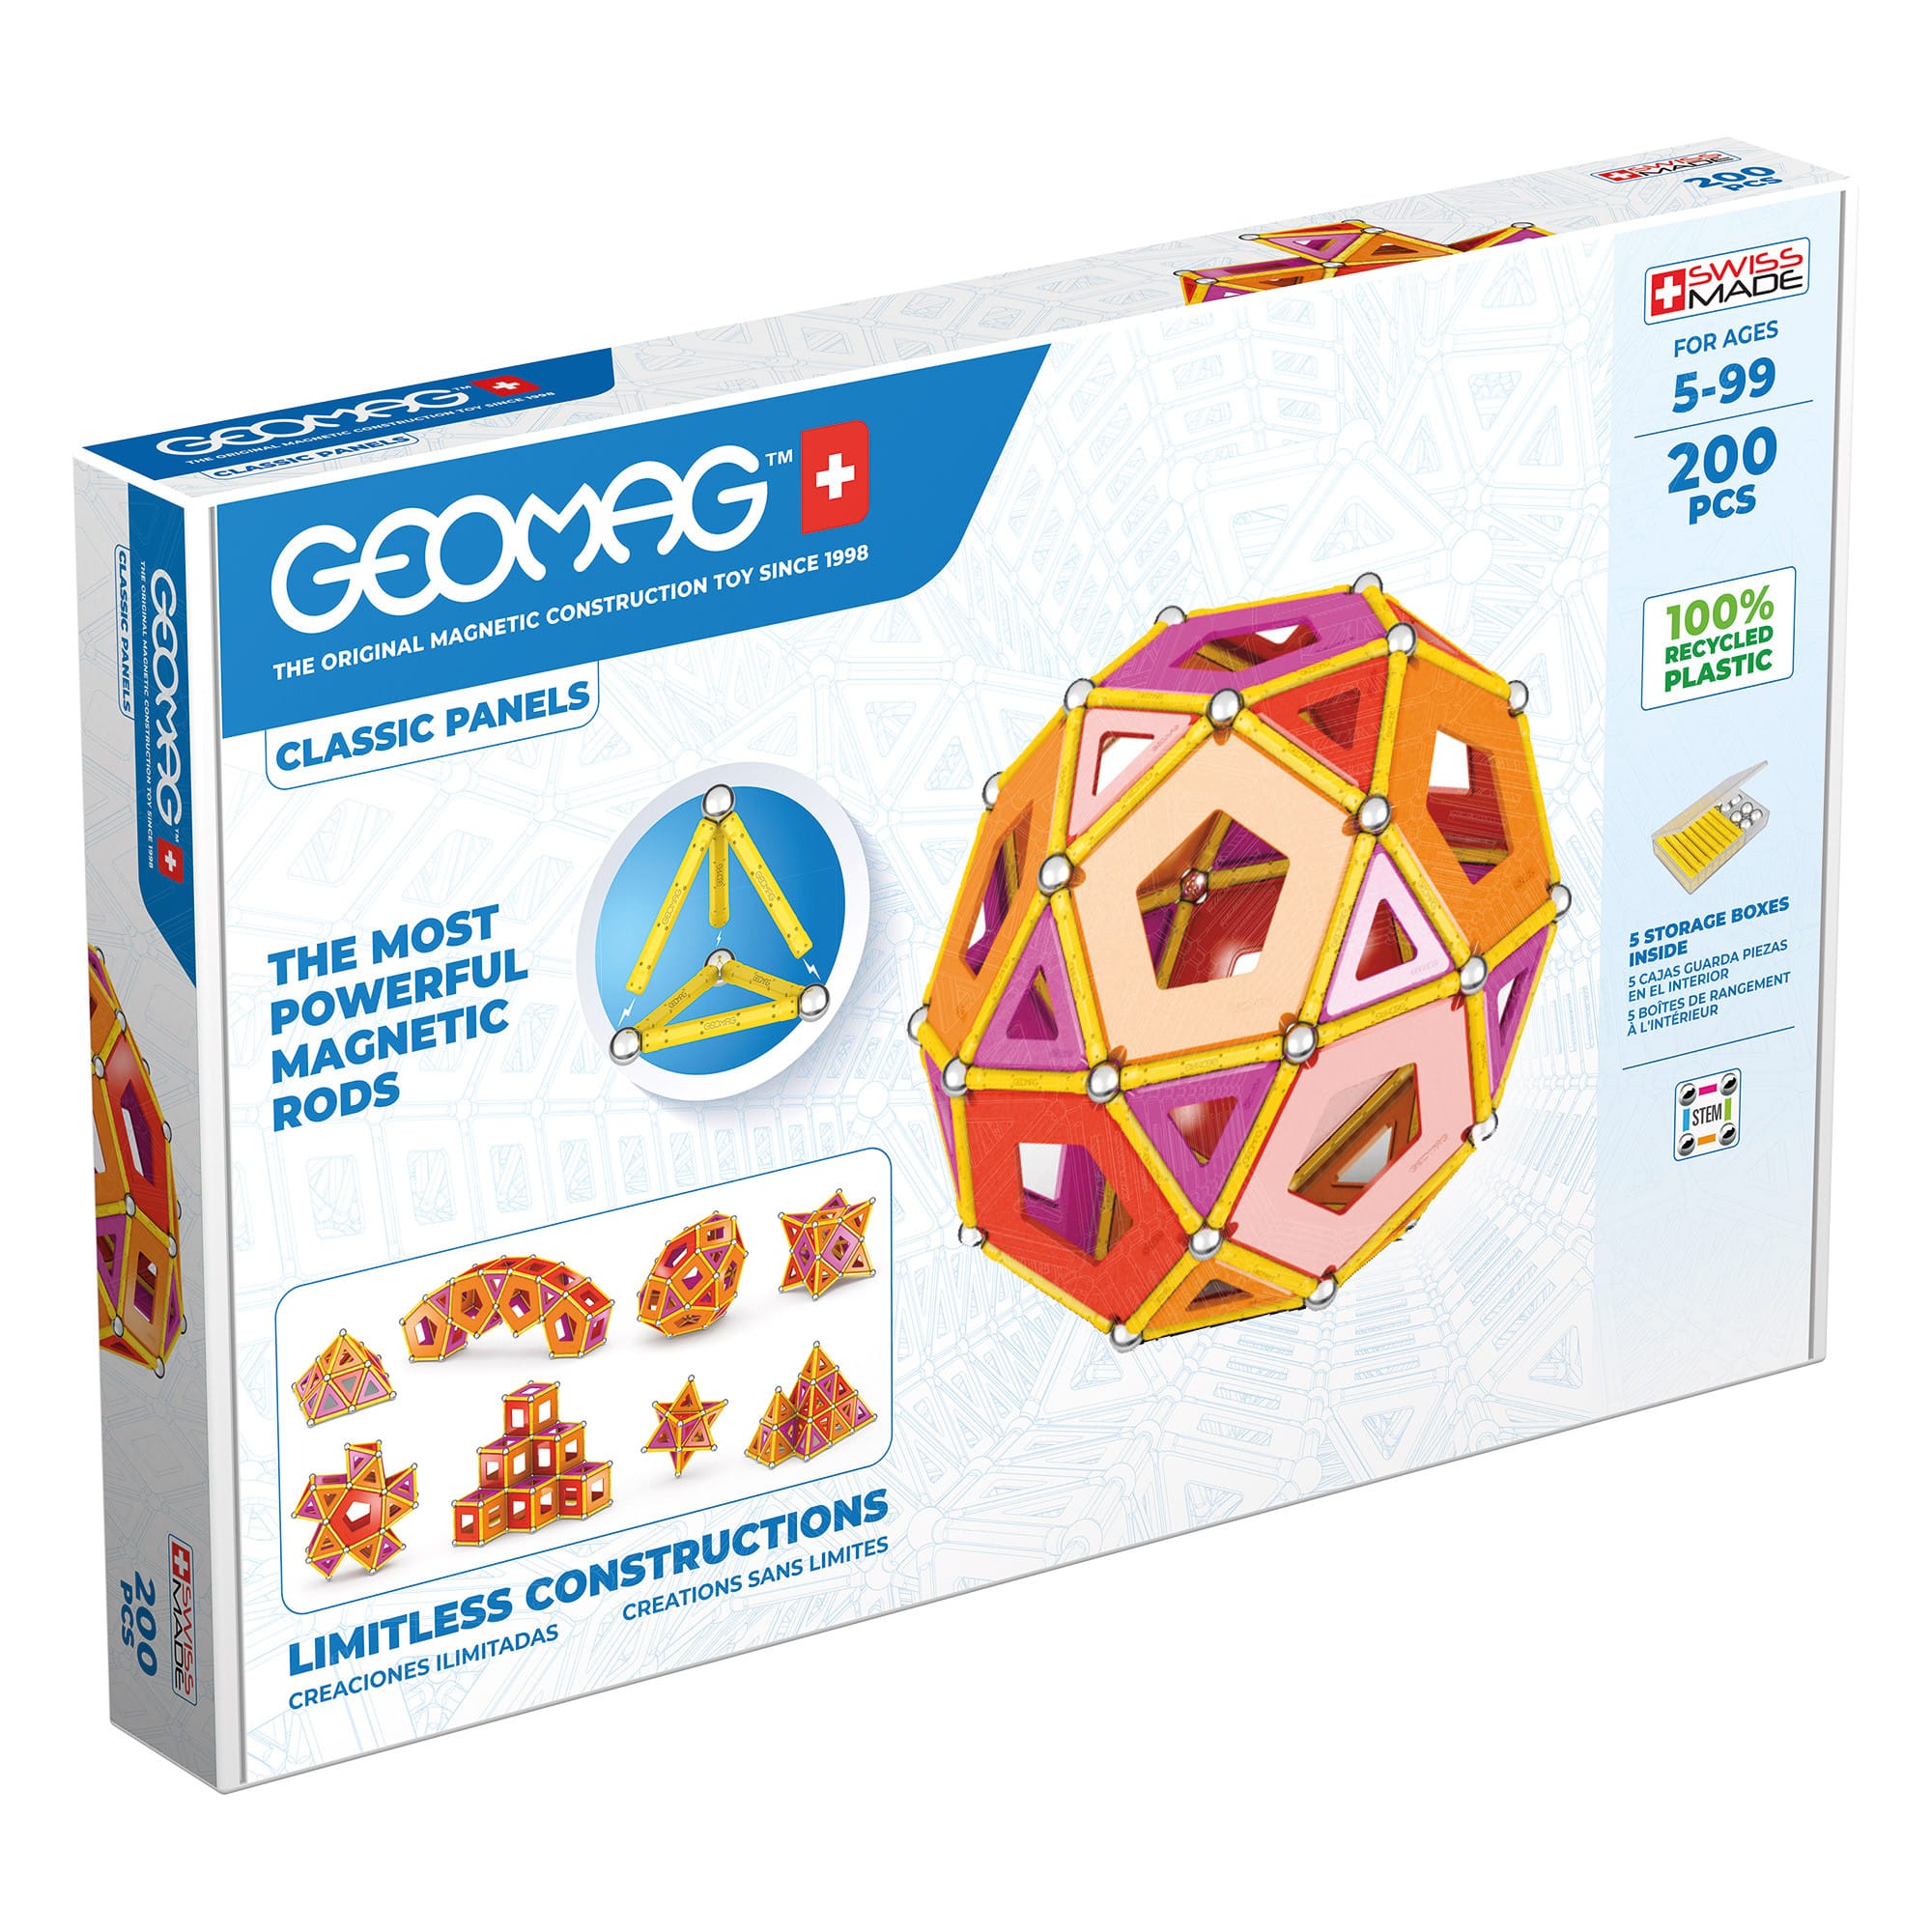 Geomag - 100% Recycled Panels - 200 Piece Set